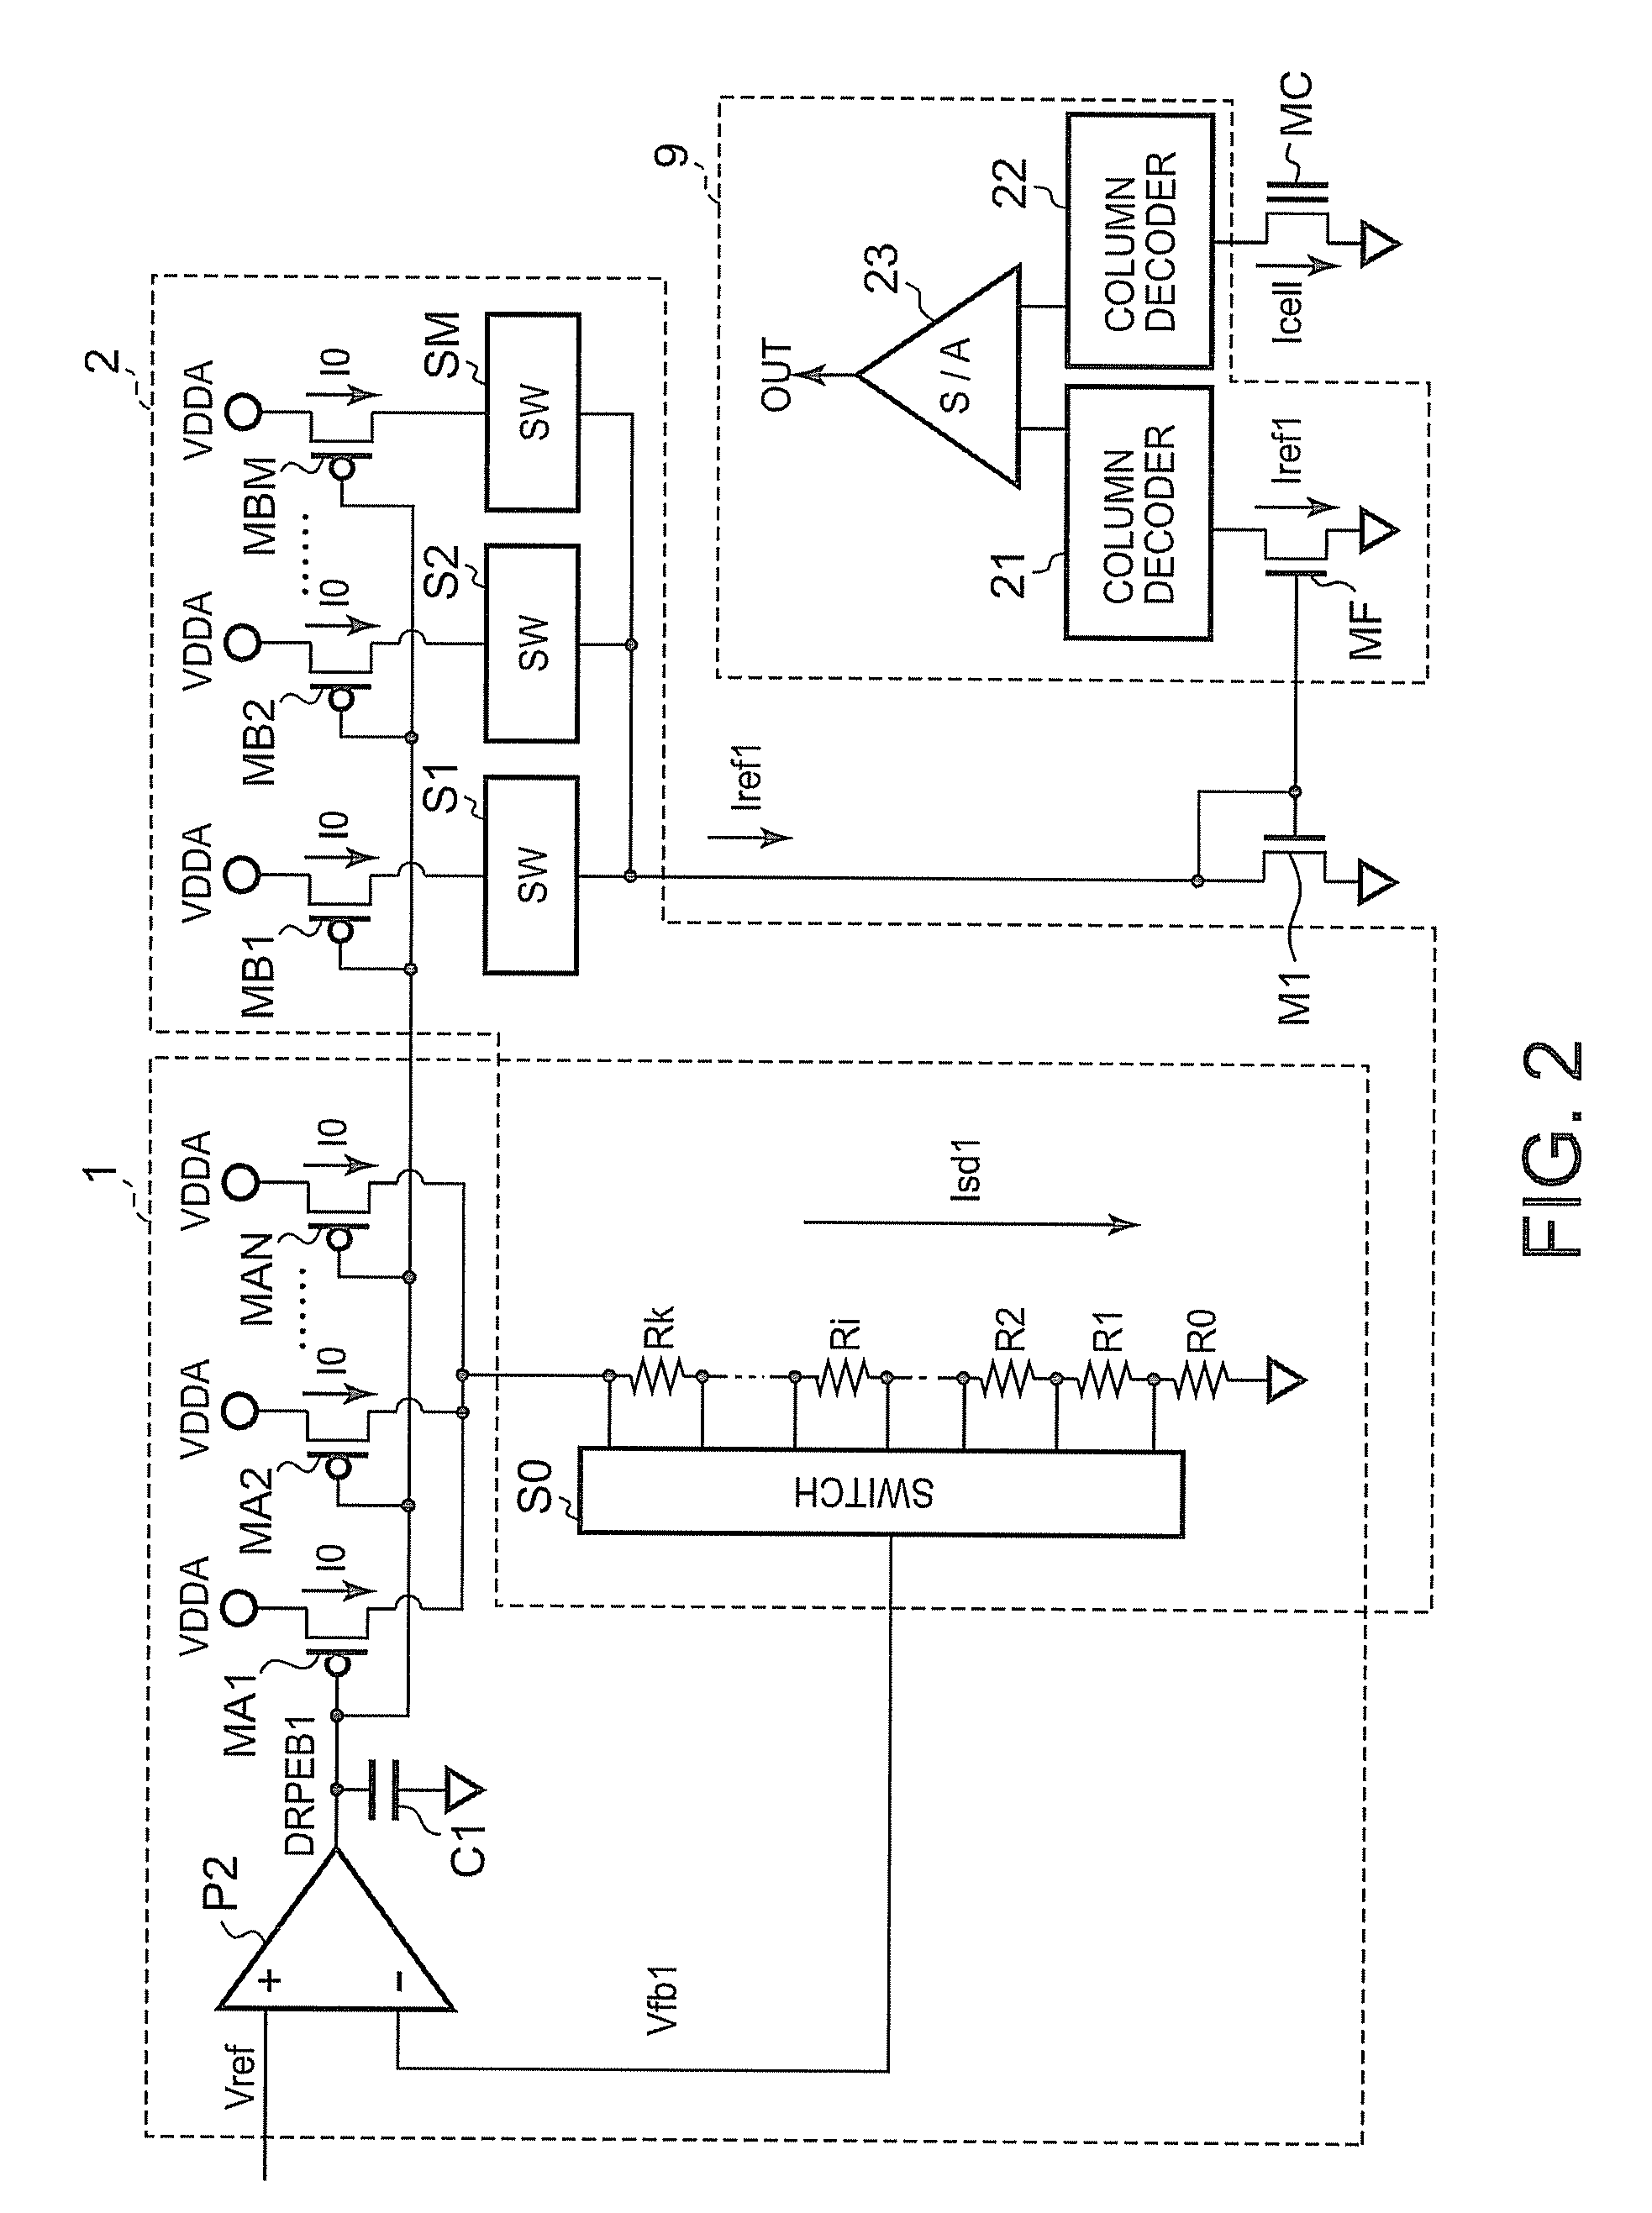 Reference current generating circuit